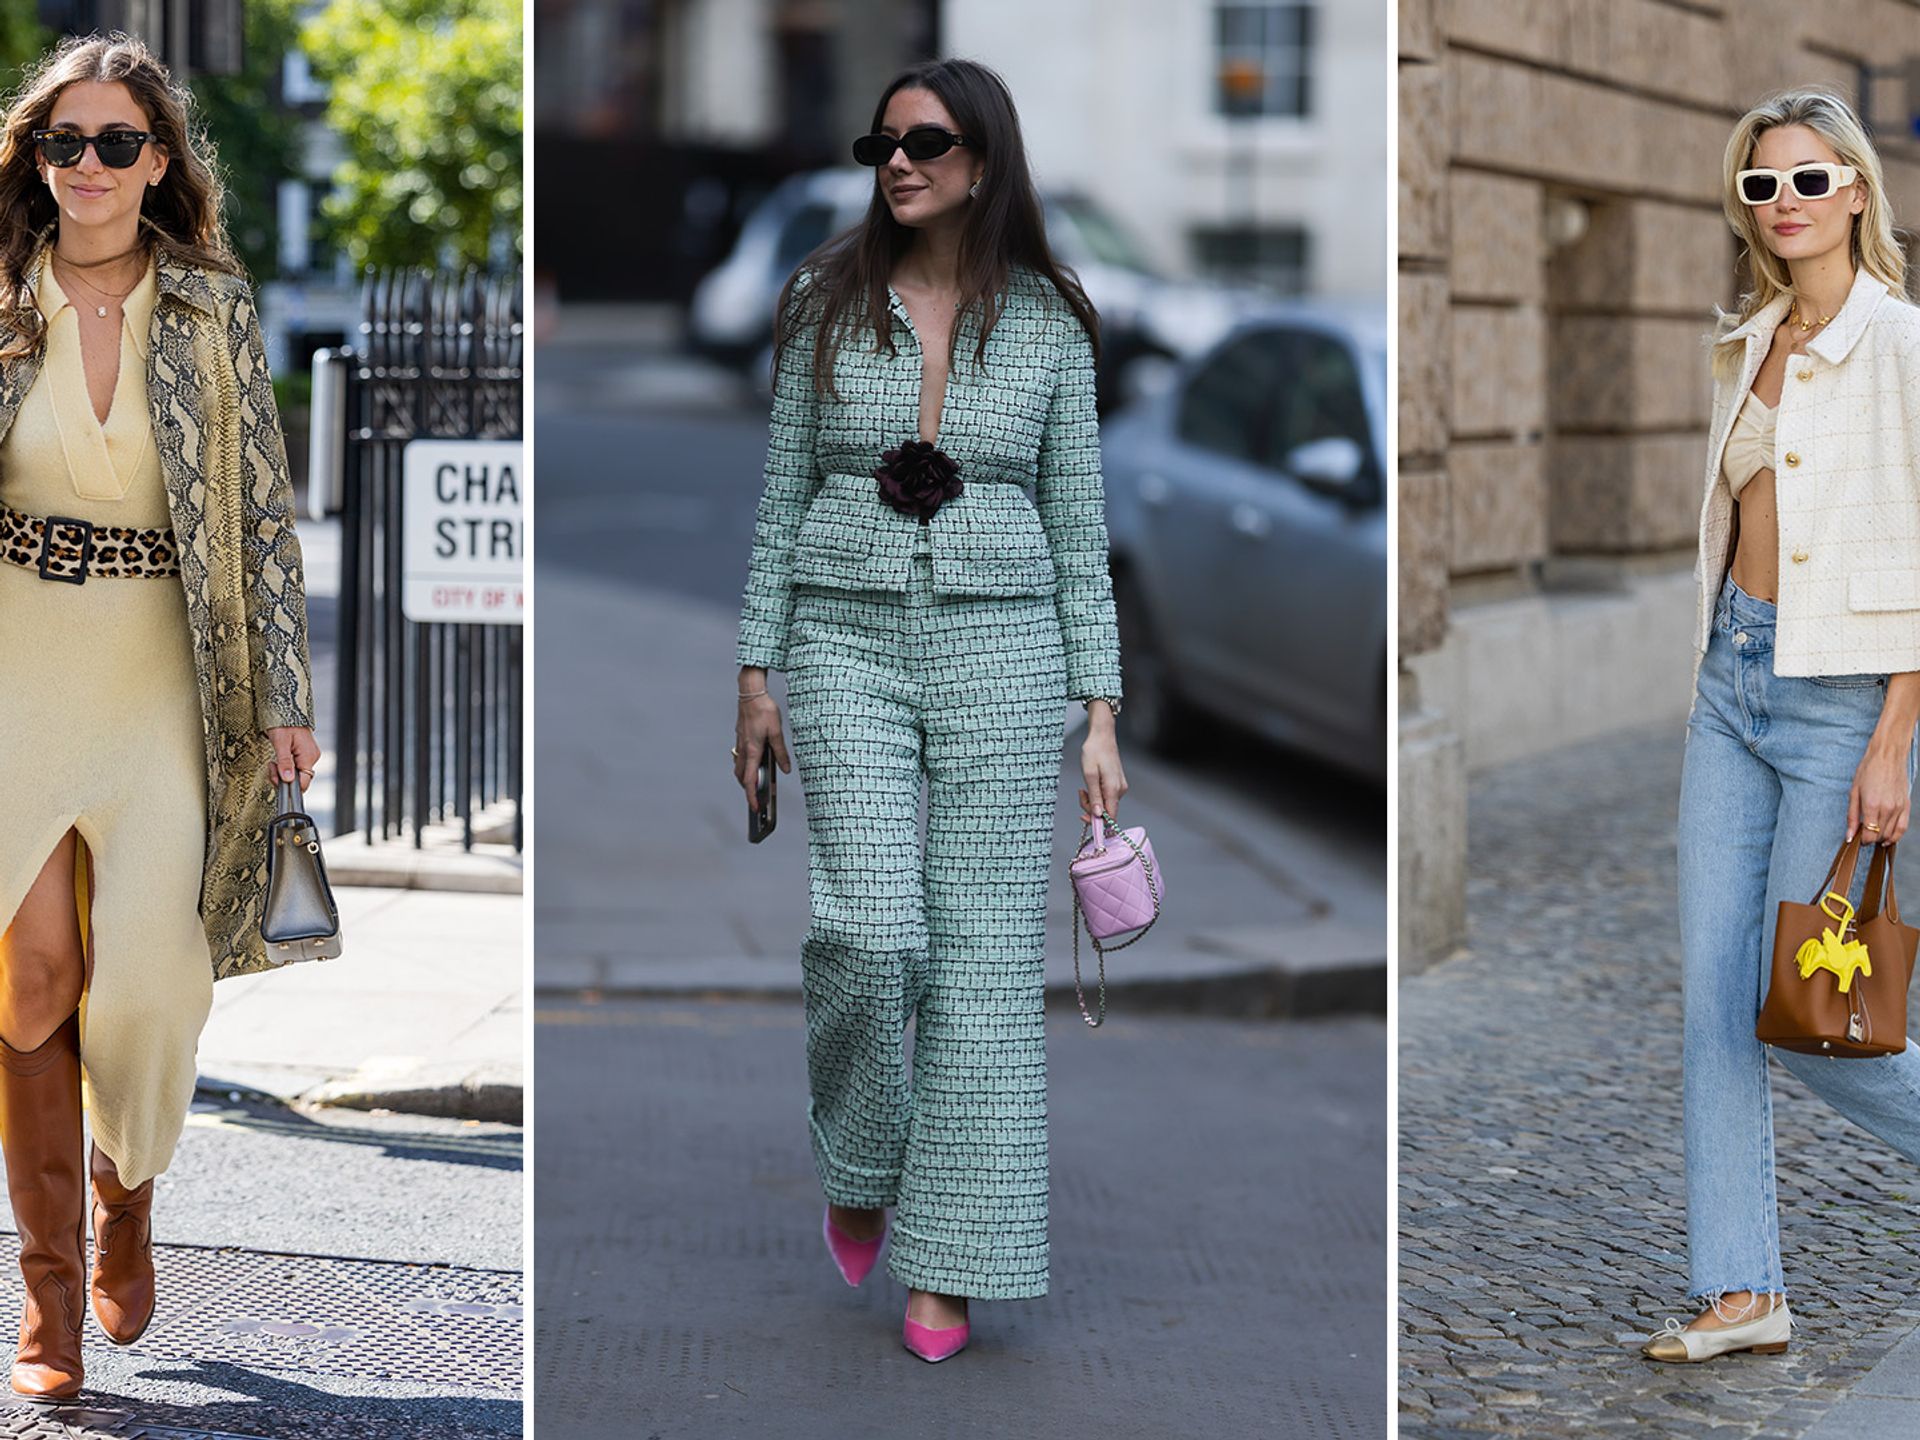 London Fashion Week street style trends: how to wear trainers